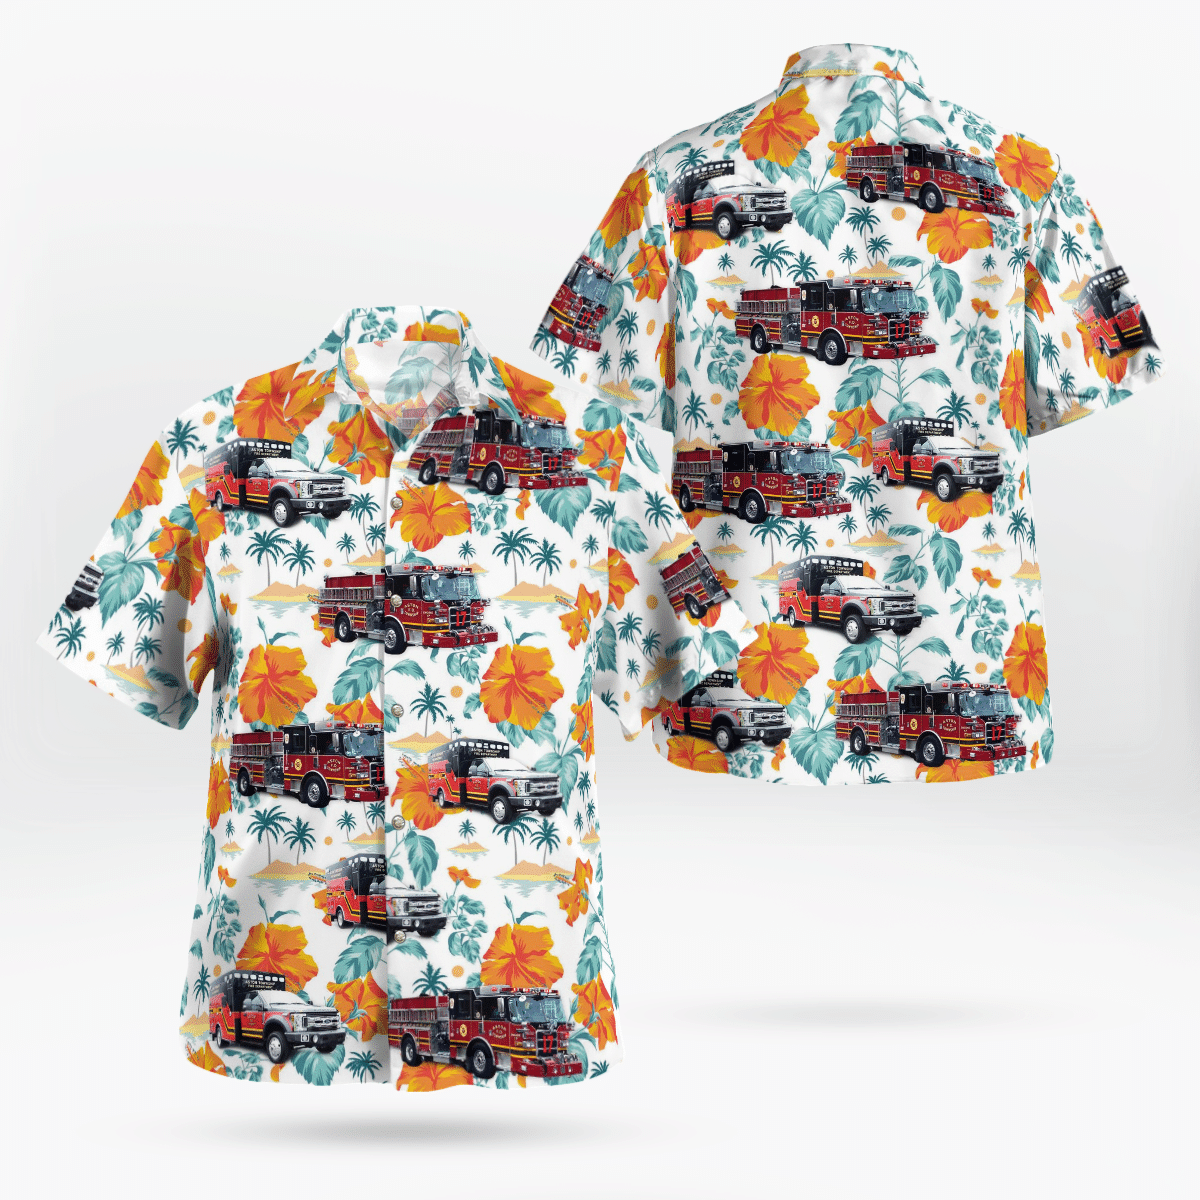 This Hawaiian Shirt Is The Perfect Summer Piece For Any Beach Vacation Word3